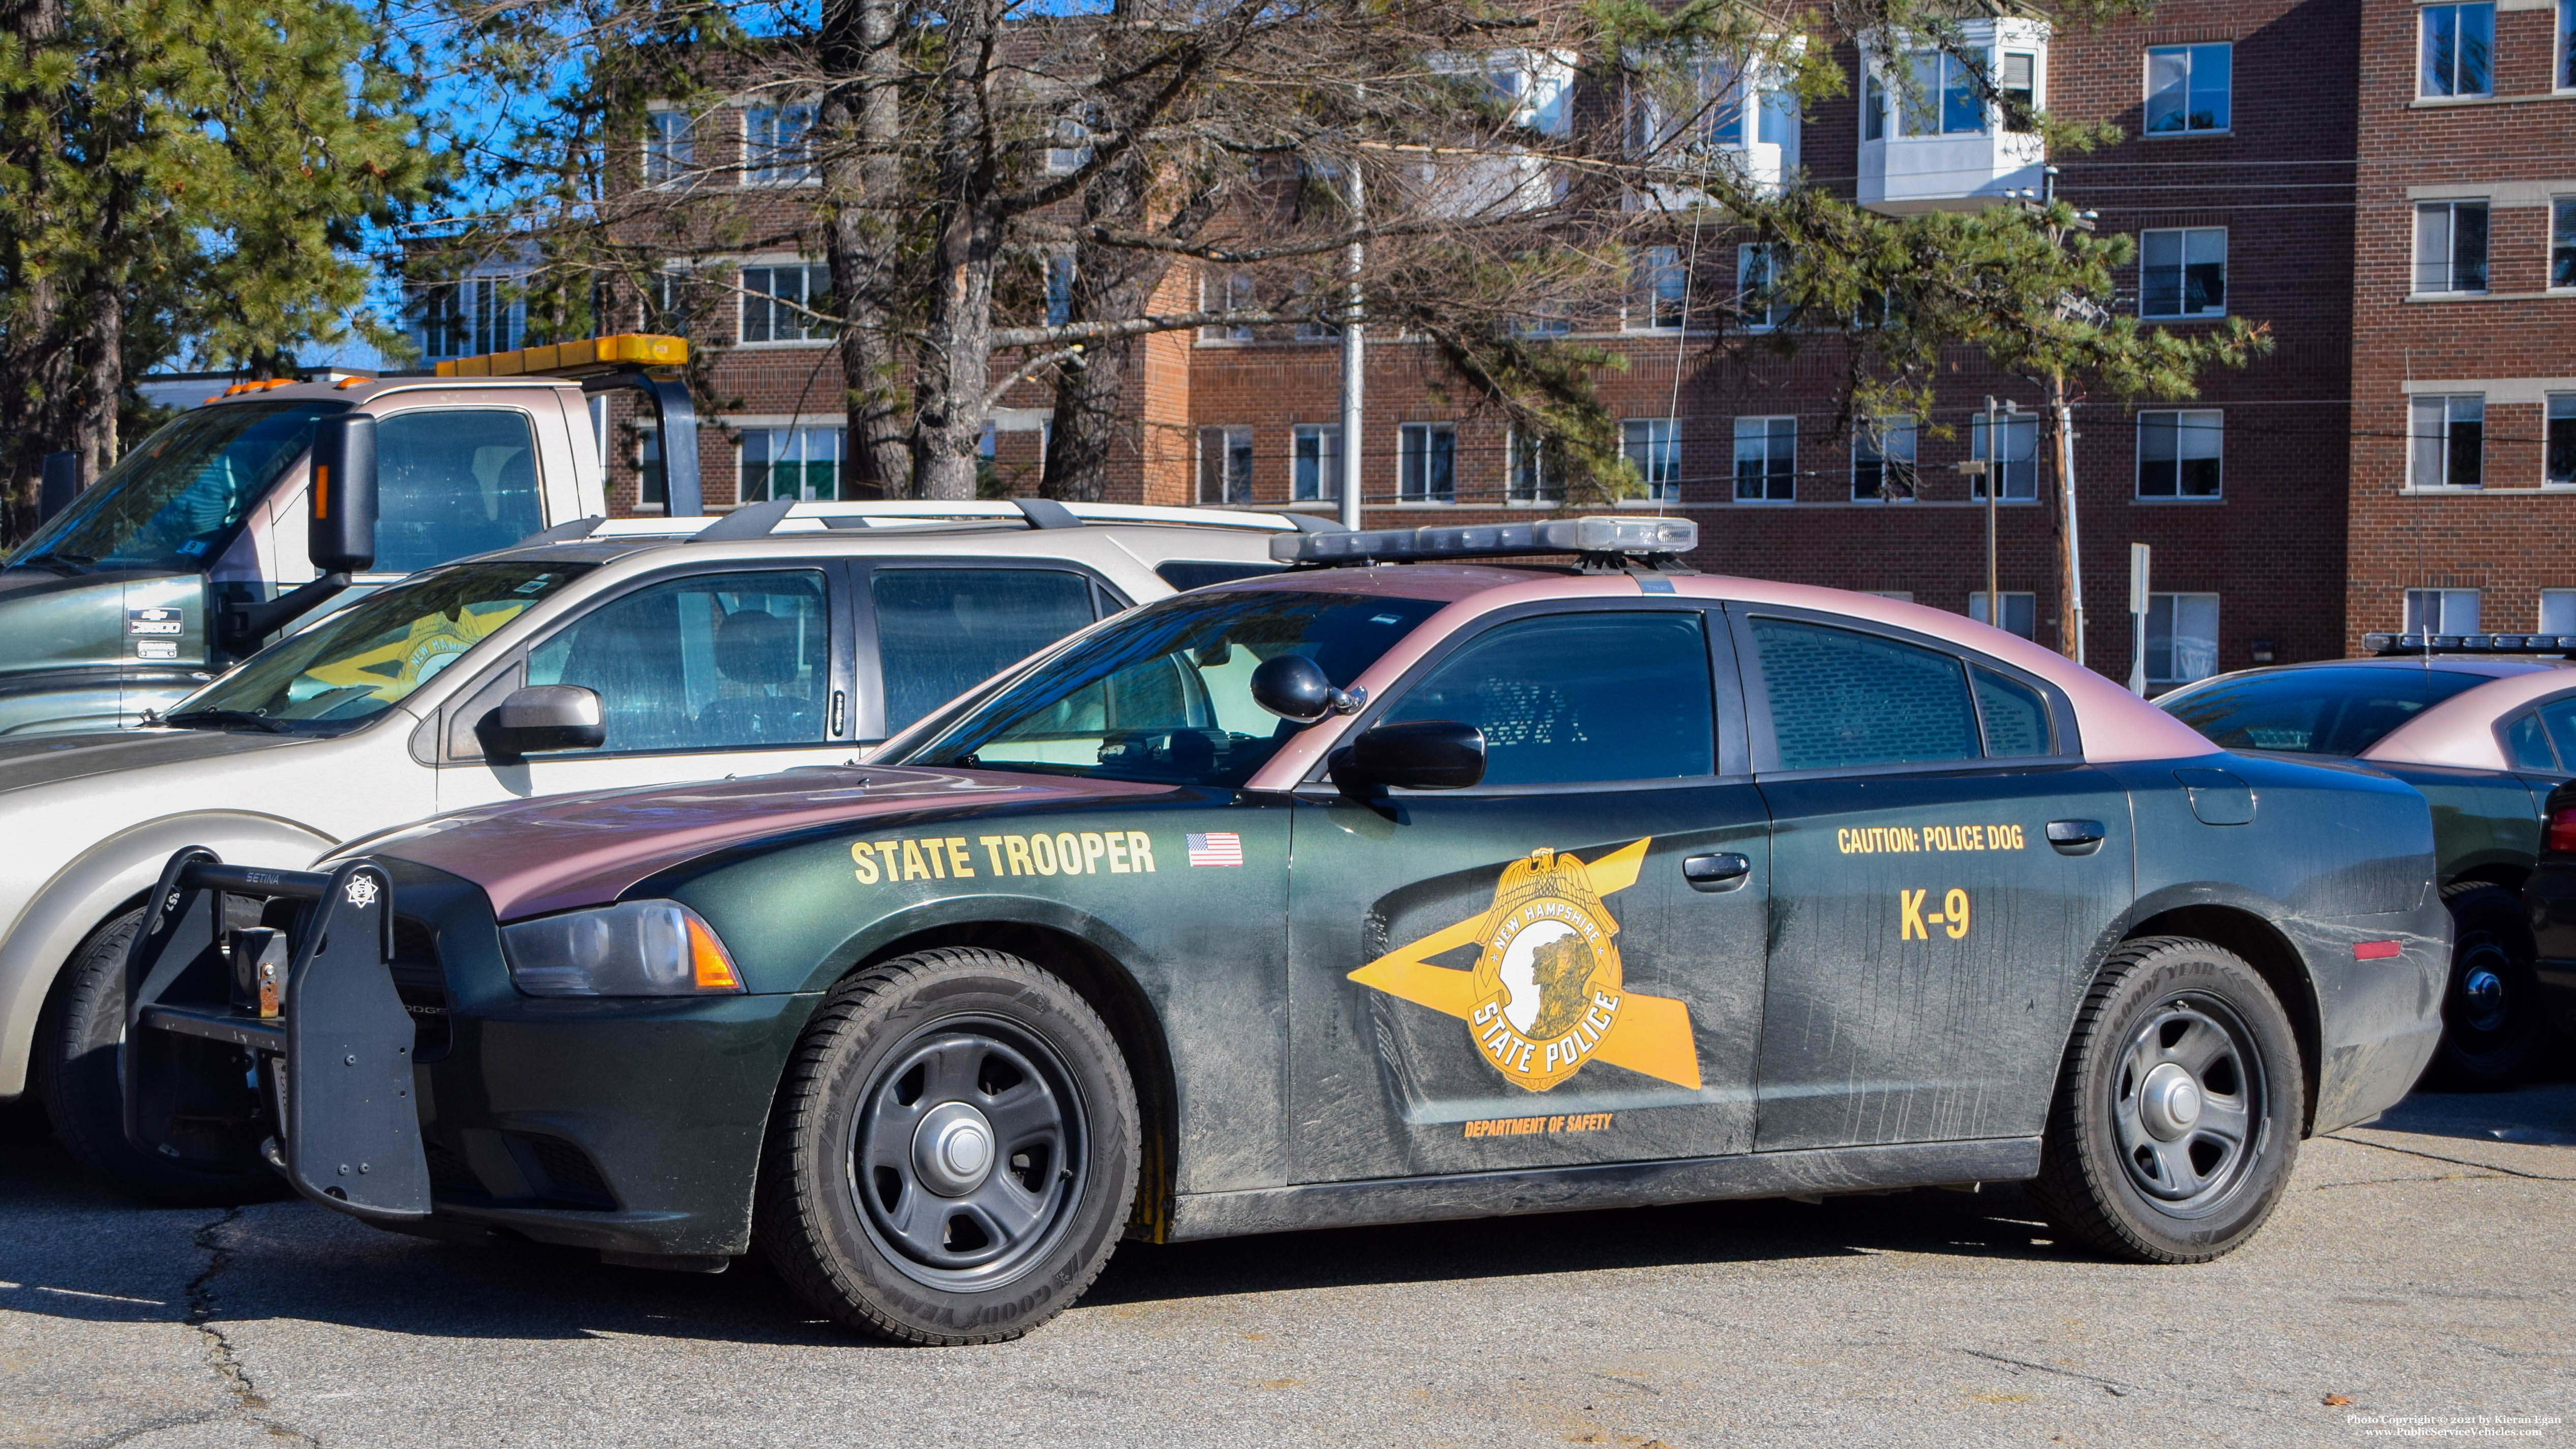 A photo  of New Hampshire State Police
            Cruiser 926, a 2011-2014 Dodge Charger             taken by Kieran Egan